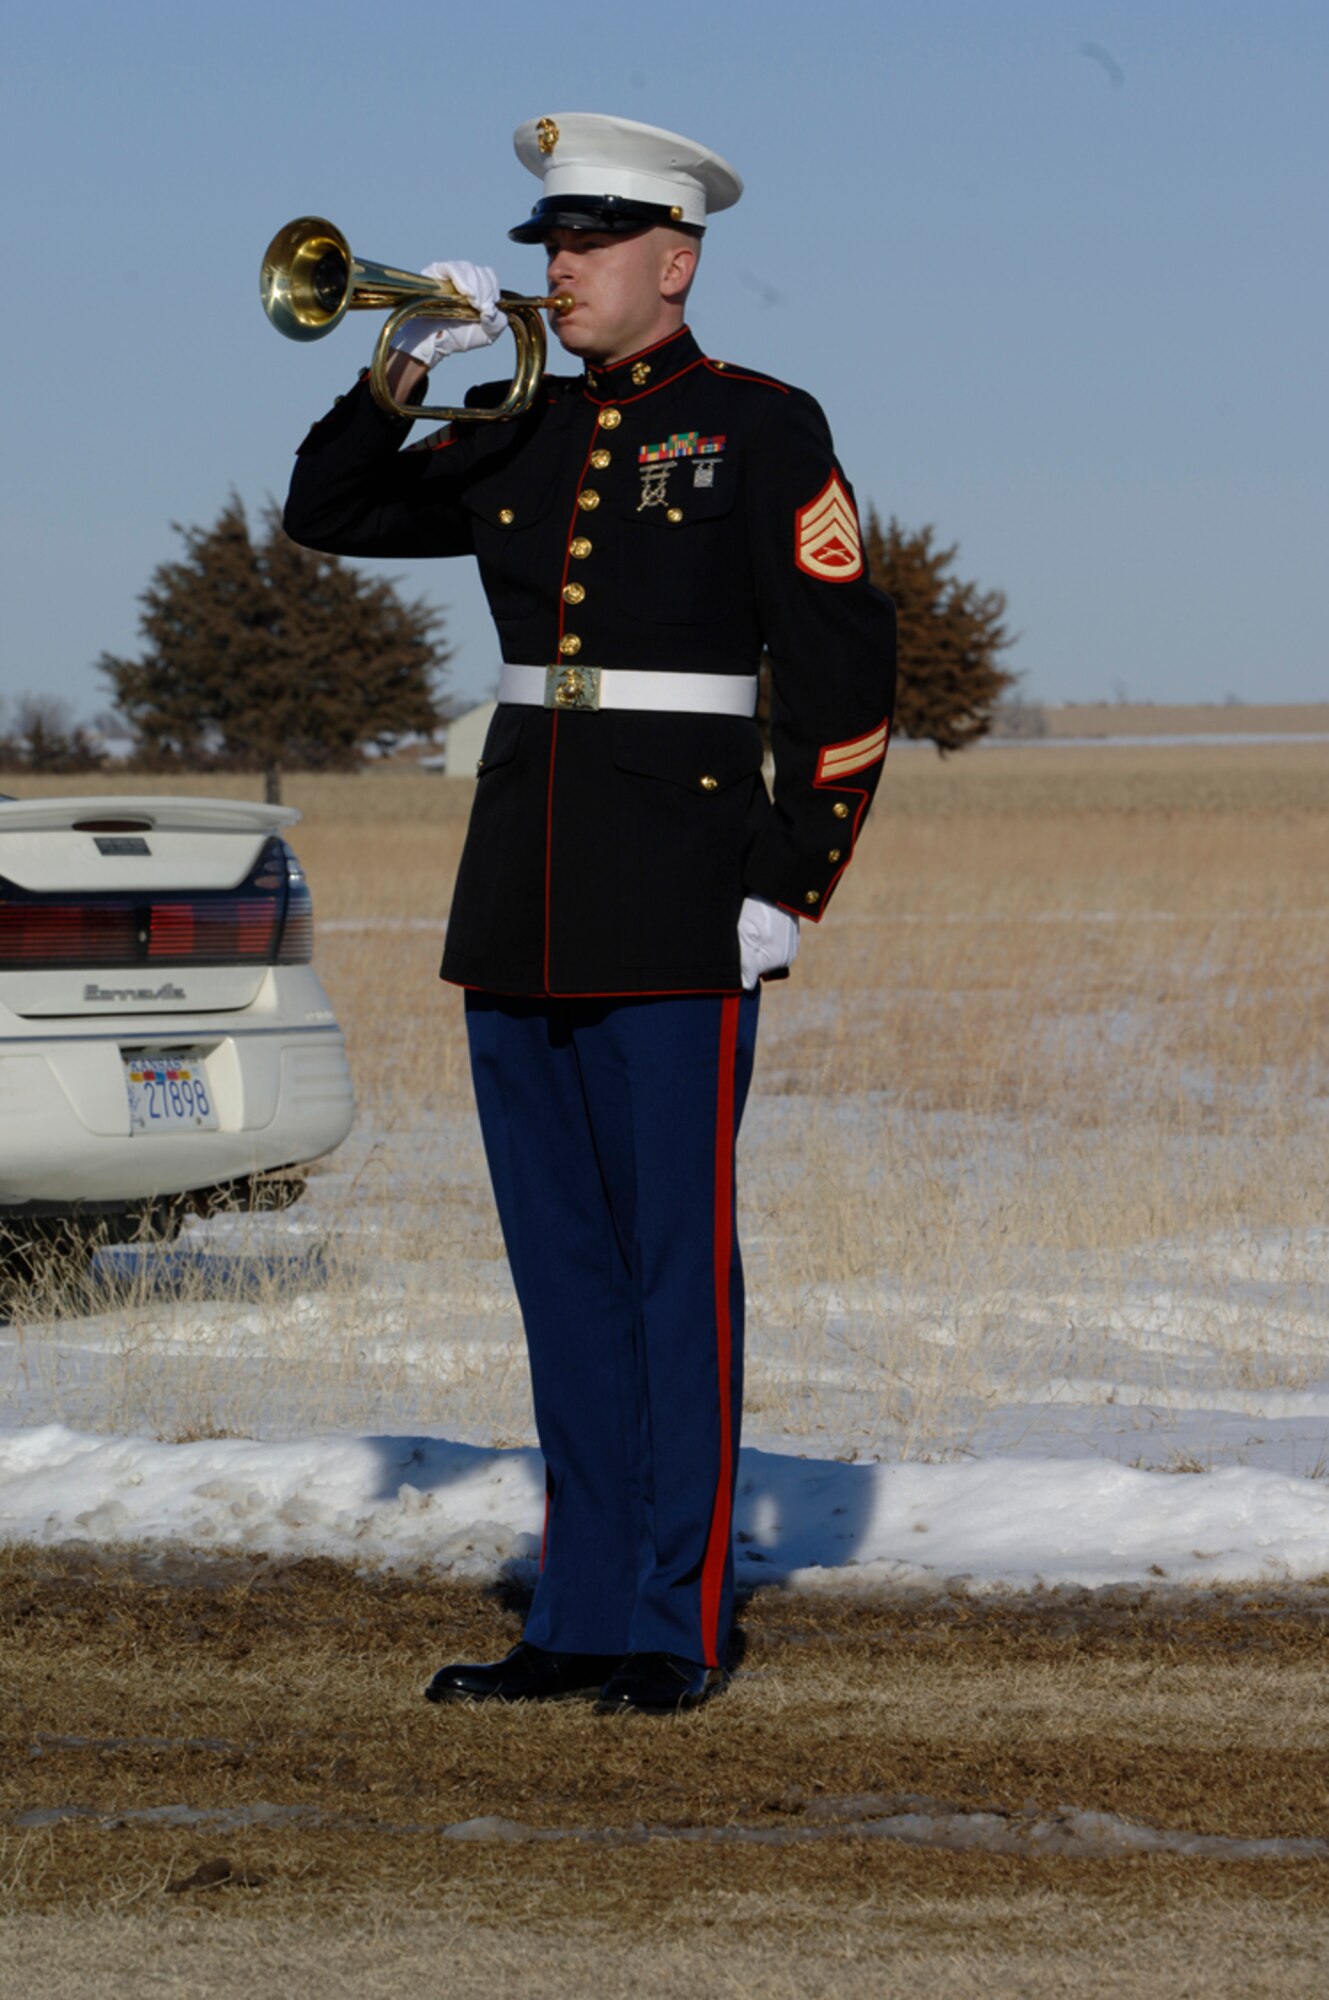 Members of the Kansas City 24th Marine Regiment serve as pallbearers Jan. 25, during the funeral of Albert “Jud” Wagner. (Air Force photos by Senior Airman Jamie Train, 22nd Communications Squadron)